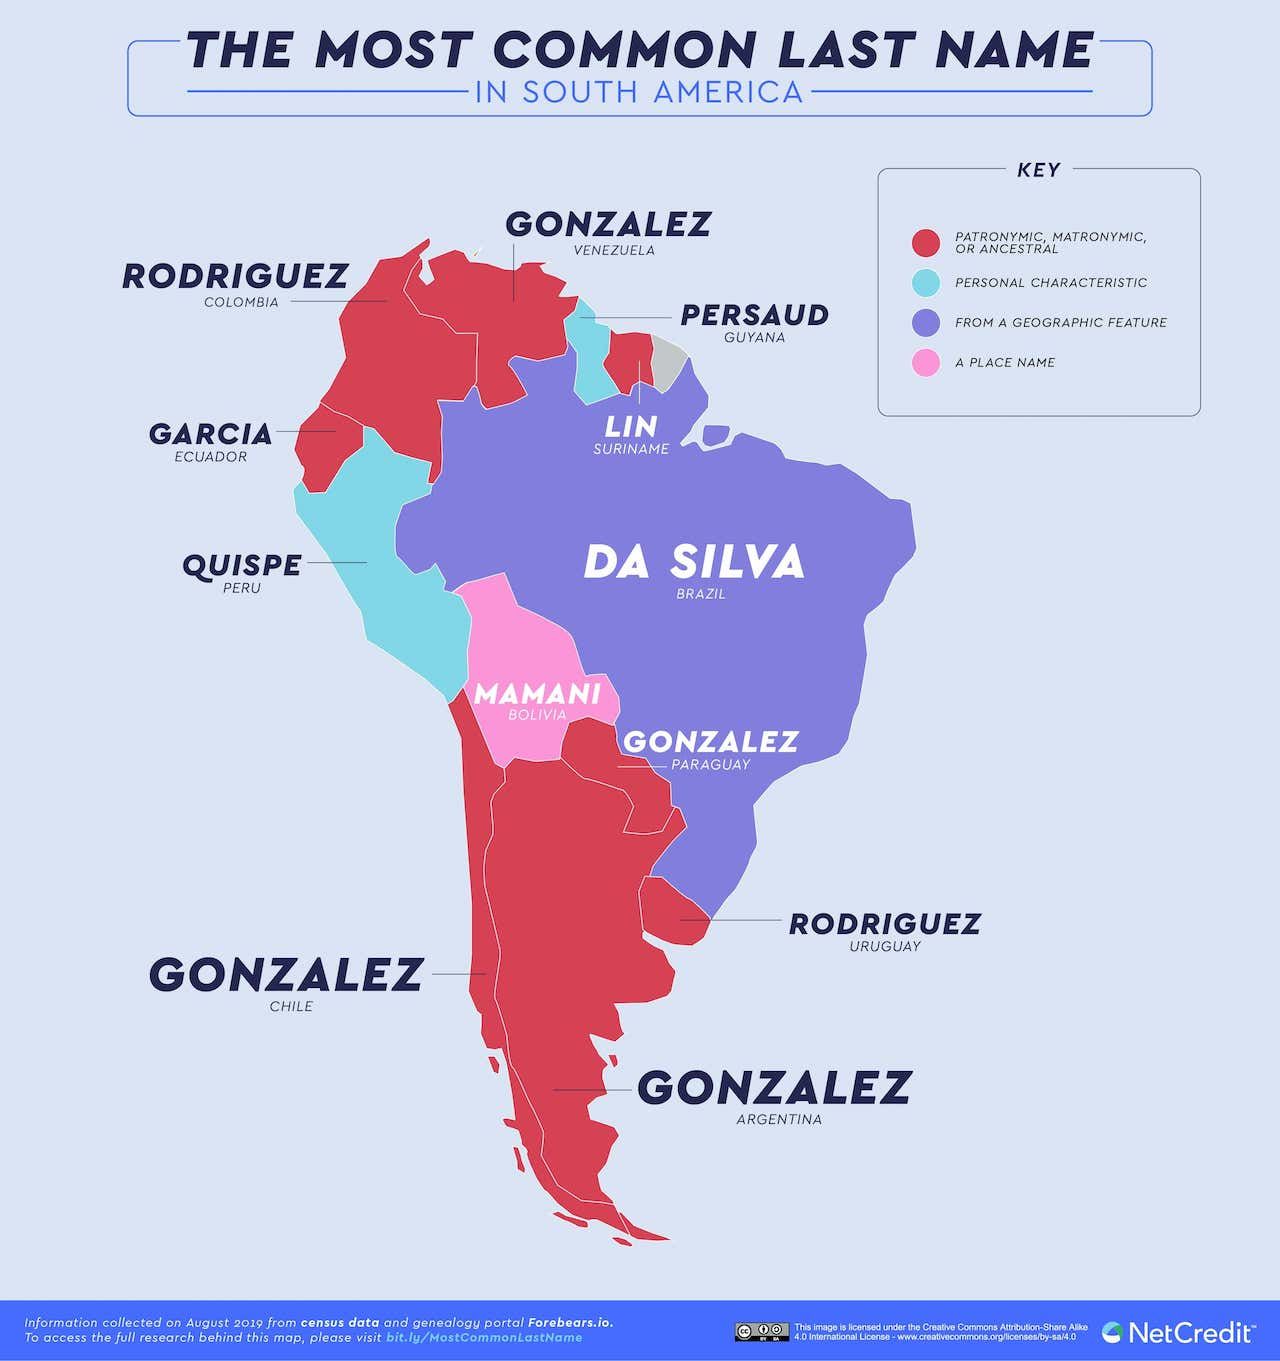 06_The-most-common-last-name-in-every-country_SouthAmerica.jpg